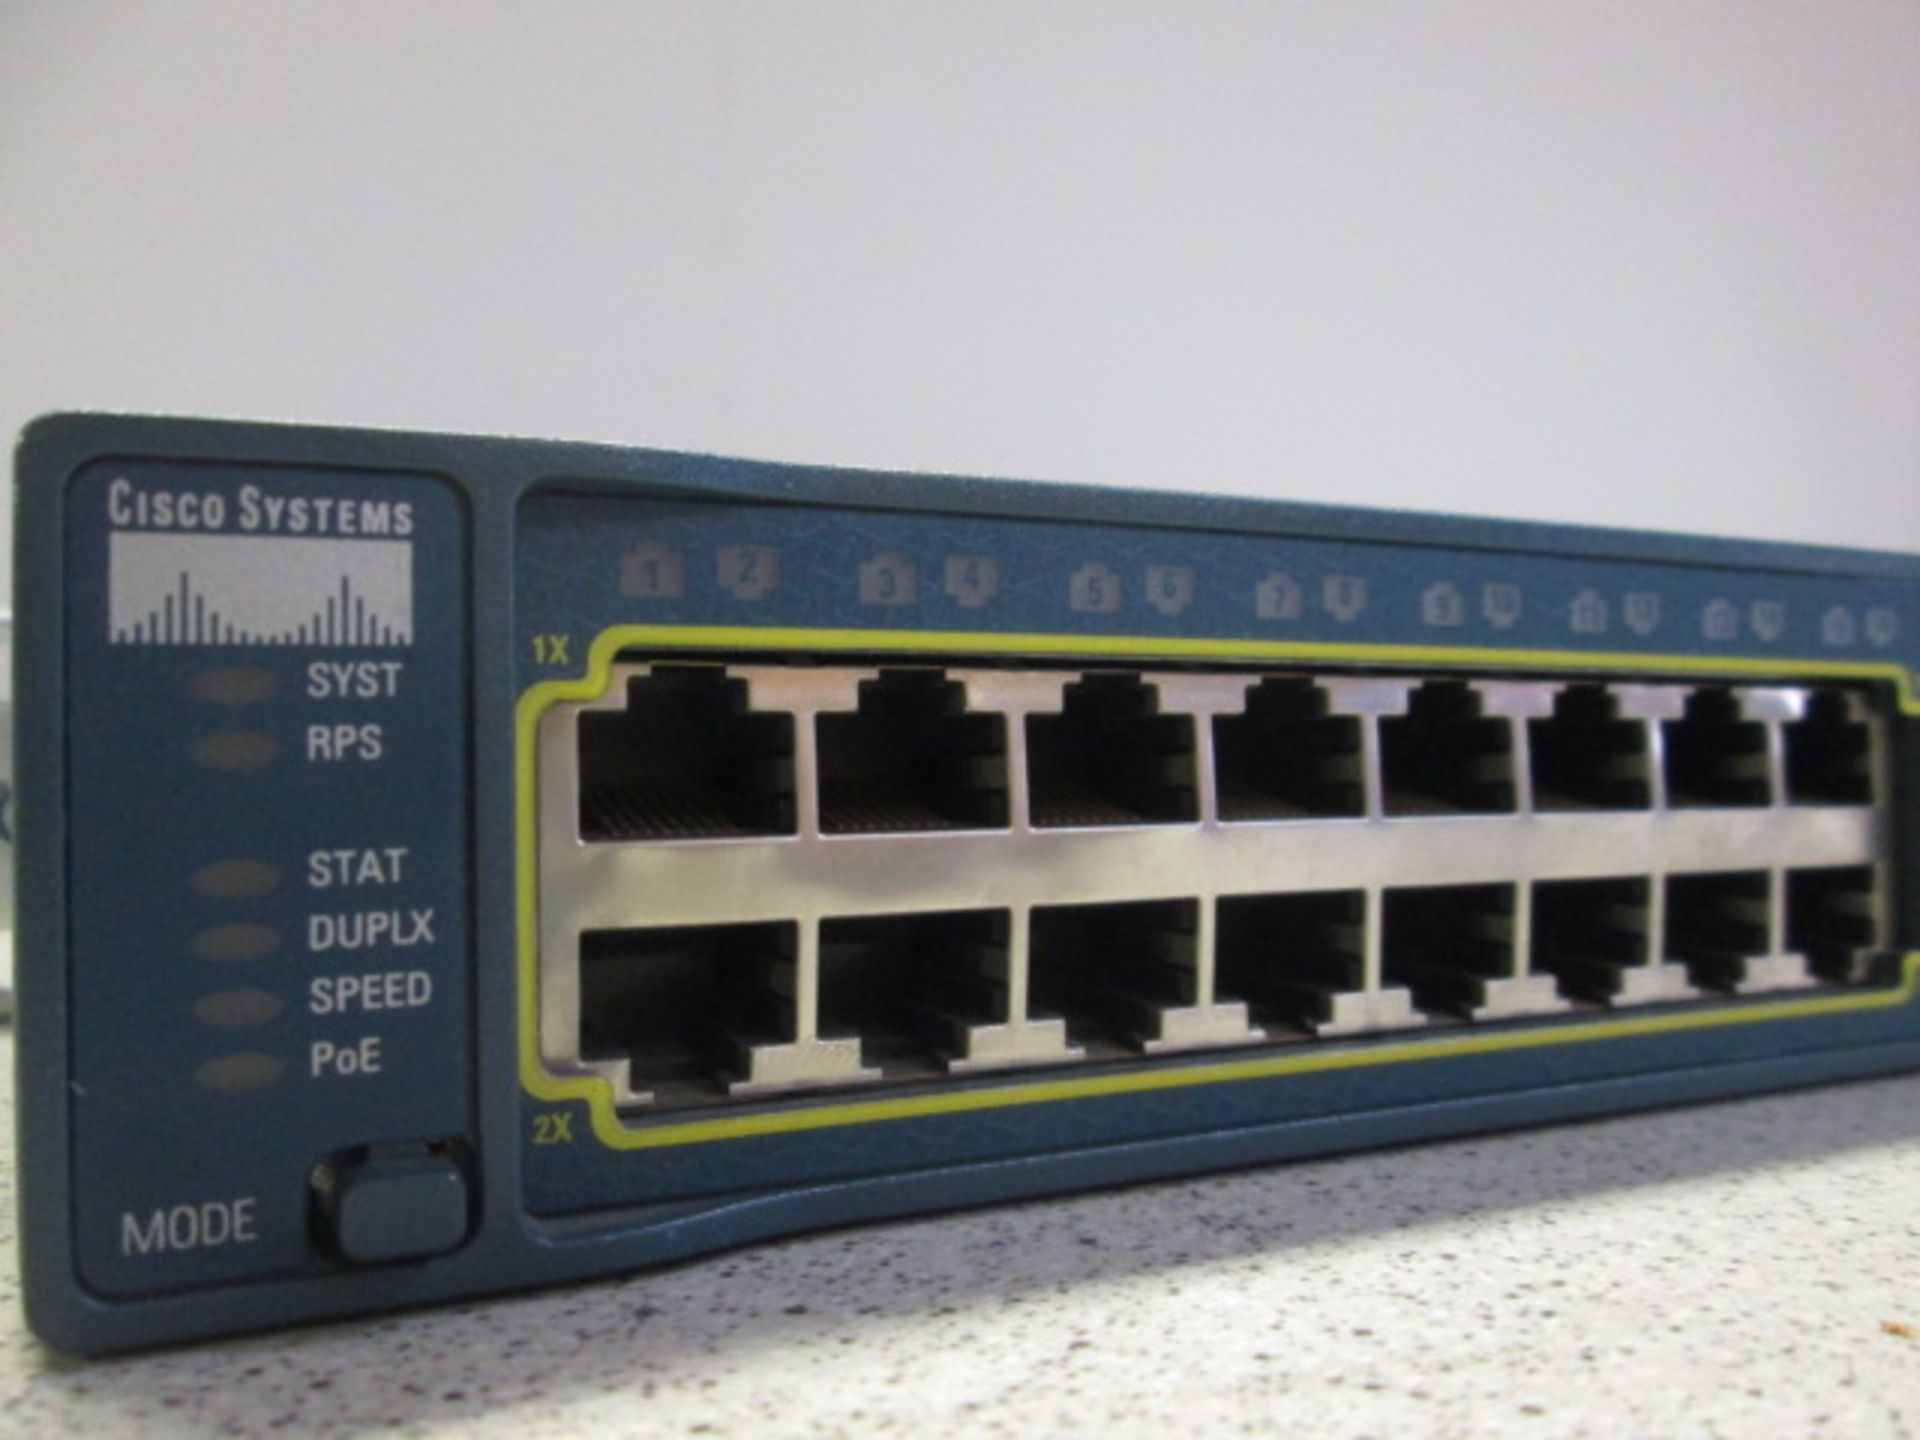 Cisco System 48 Port Switch, Model Catalyst 3560. Comes with Power Supply - Image 2 of 3